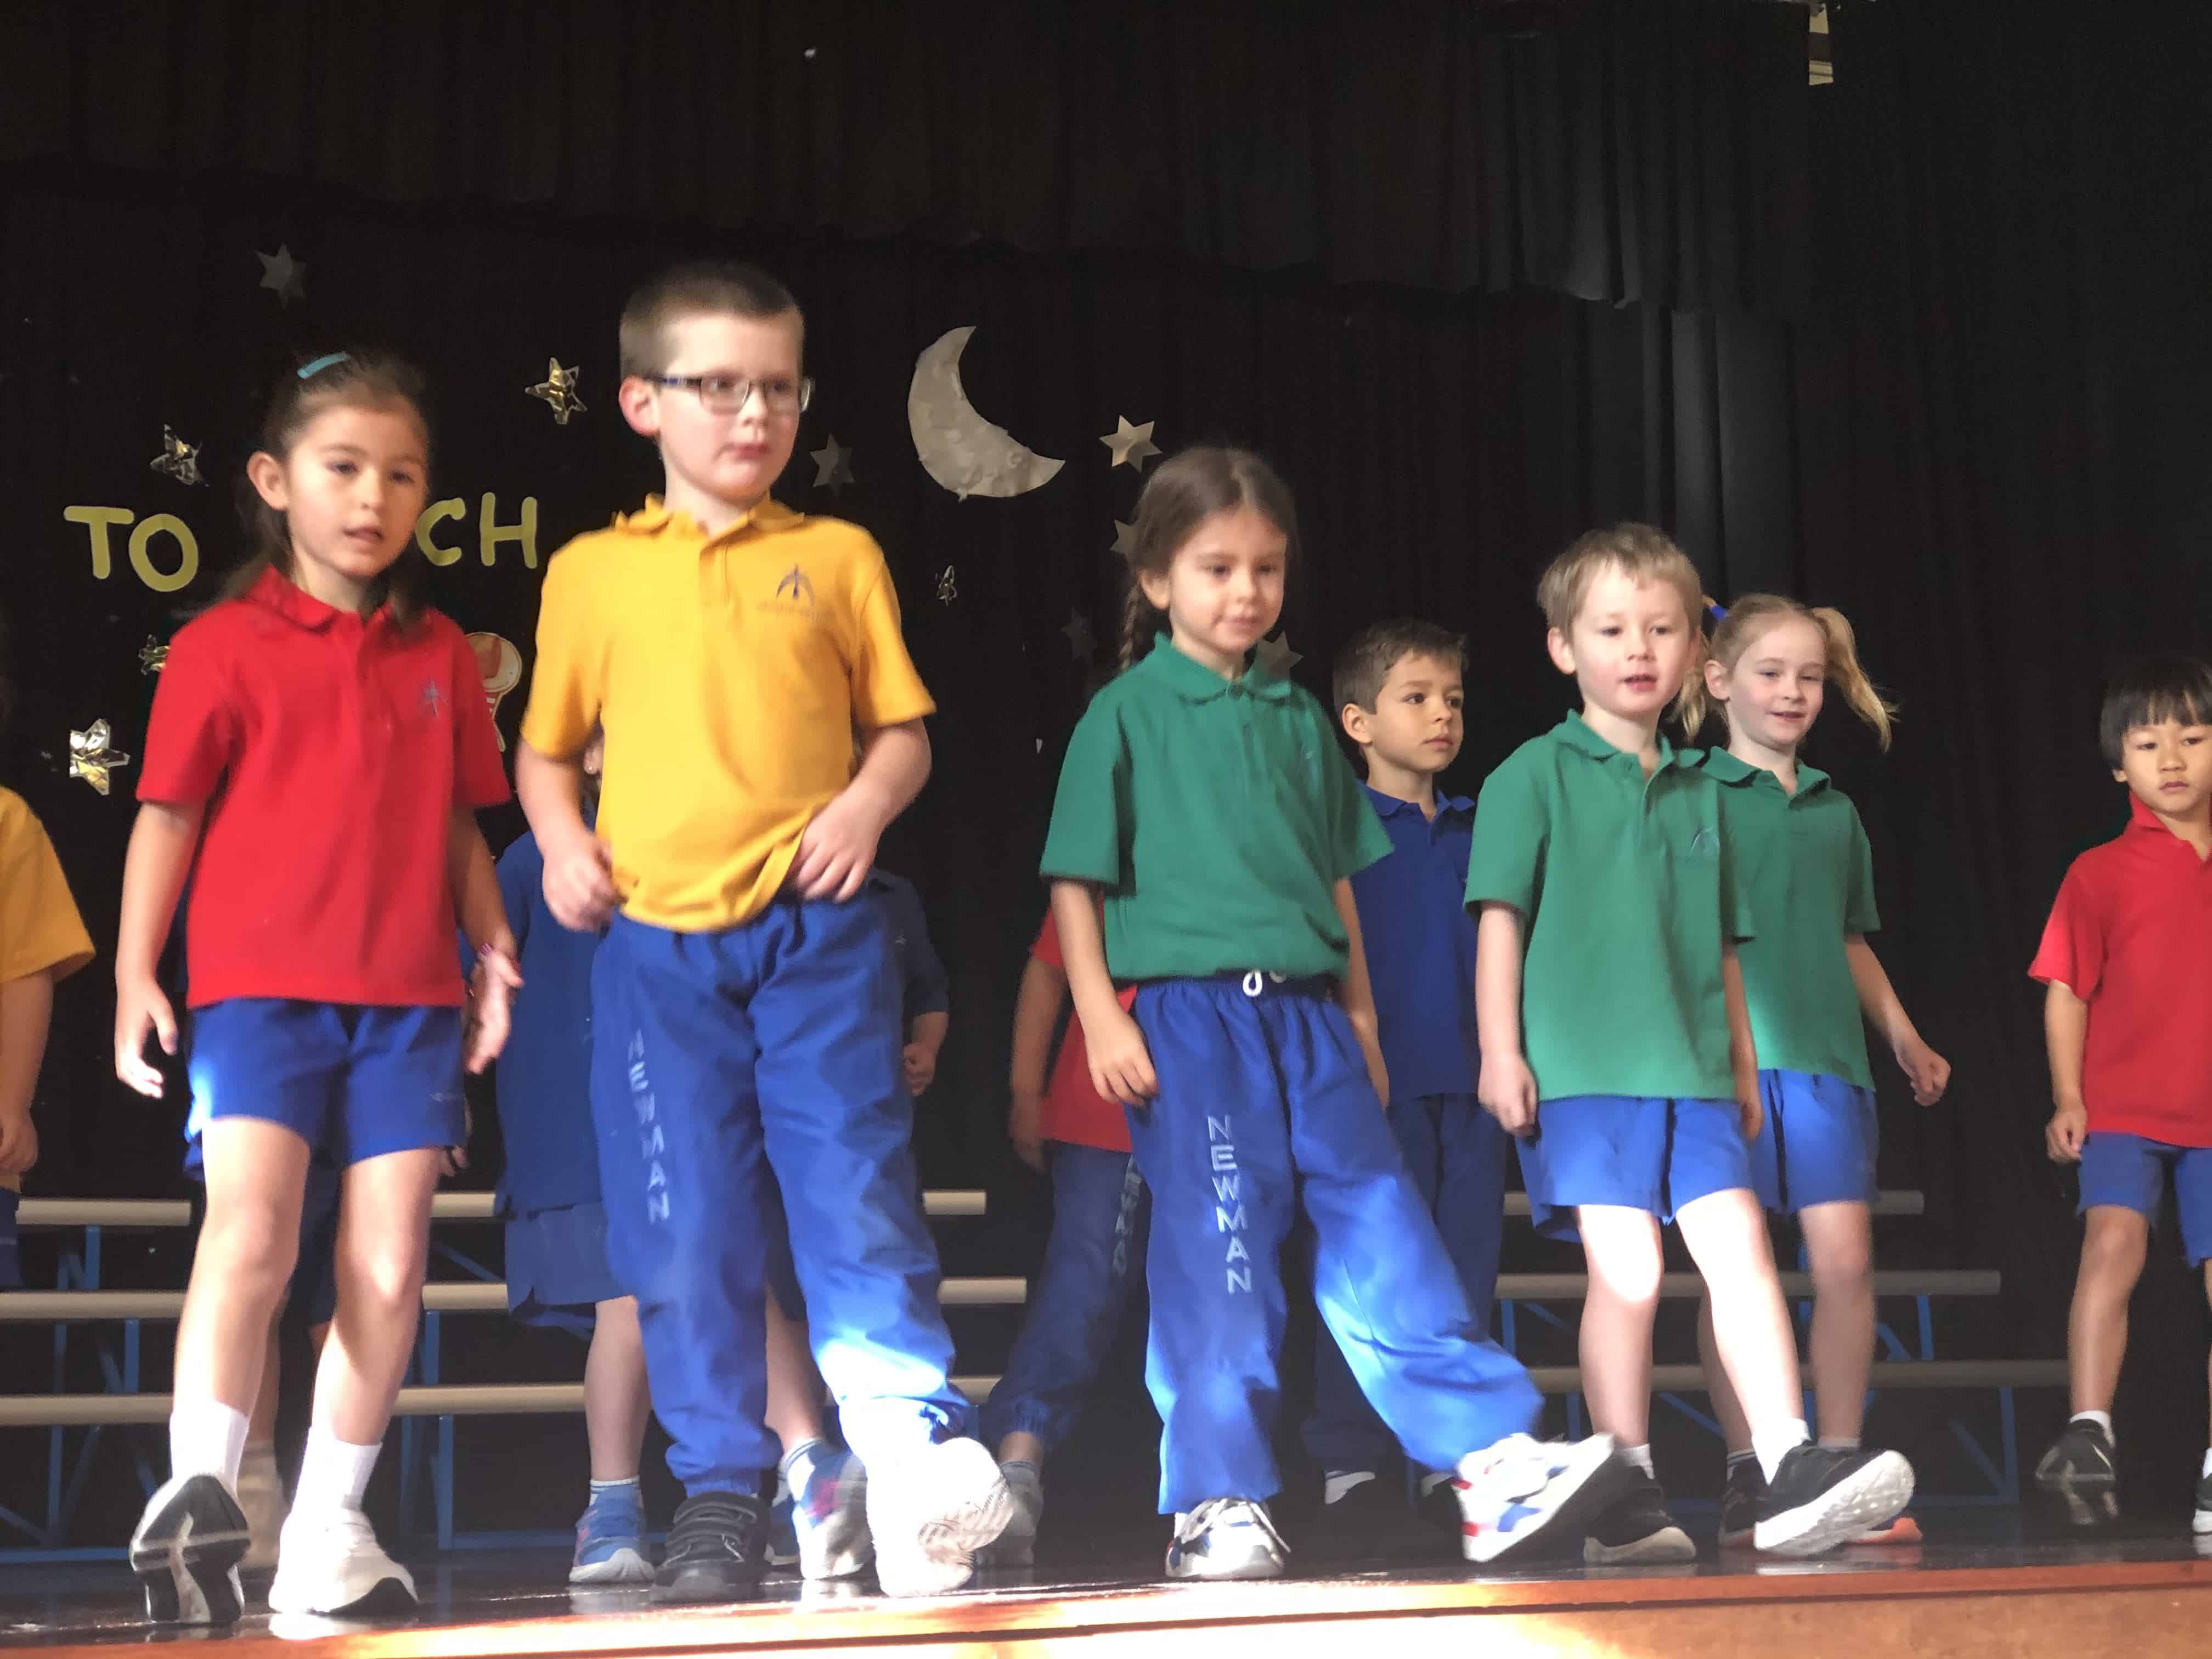 Newman News Term 3 Week 4: From the Leader of Early Childhood